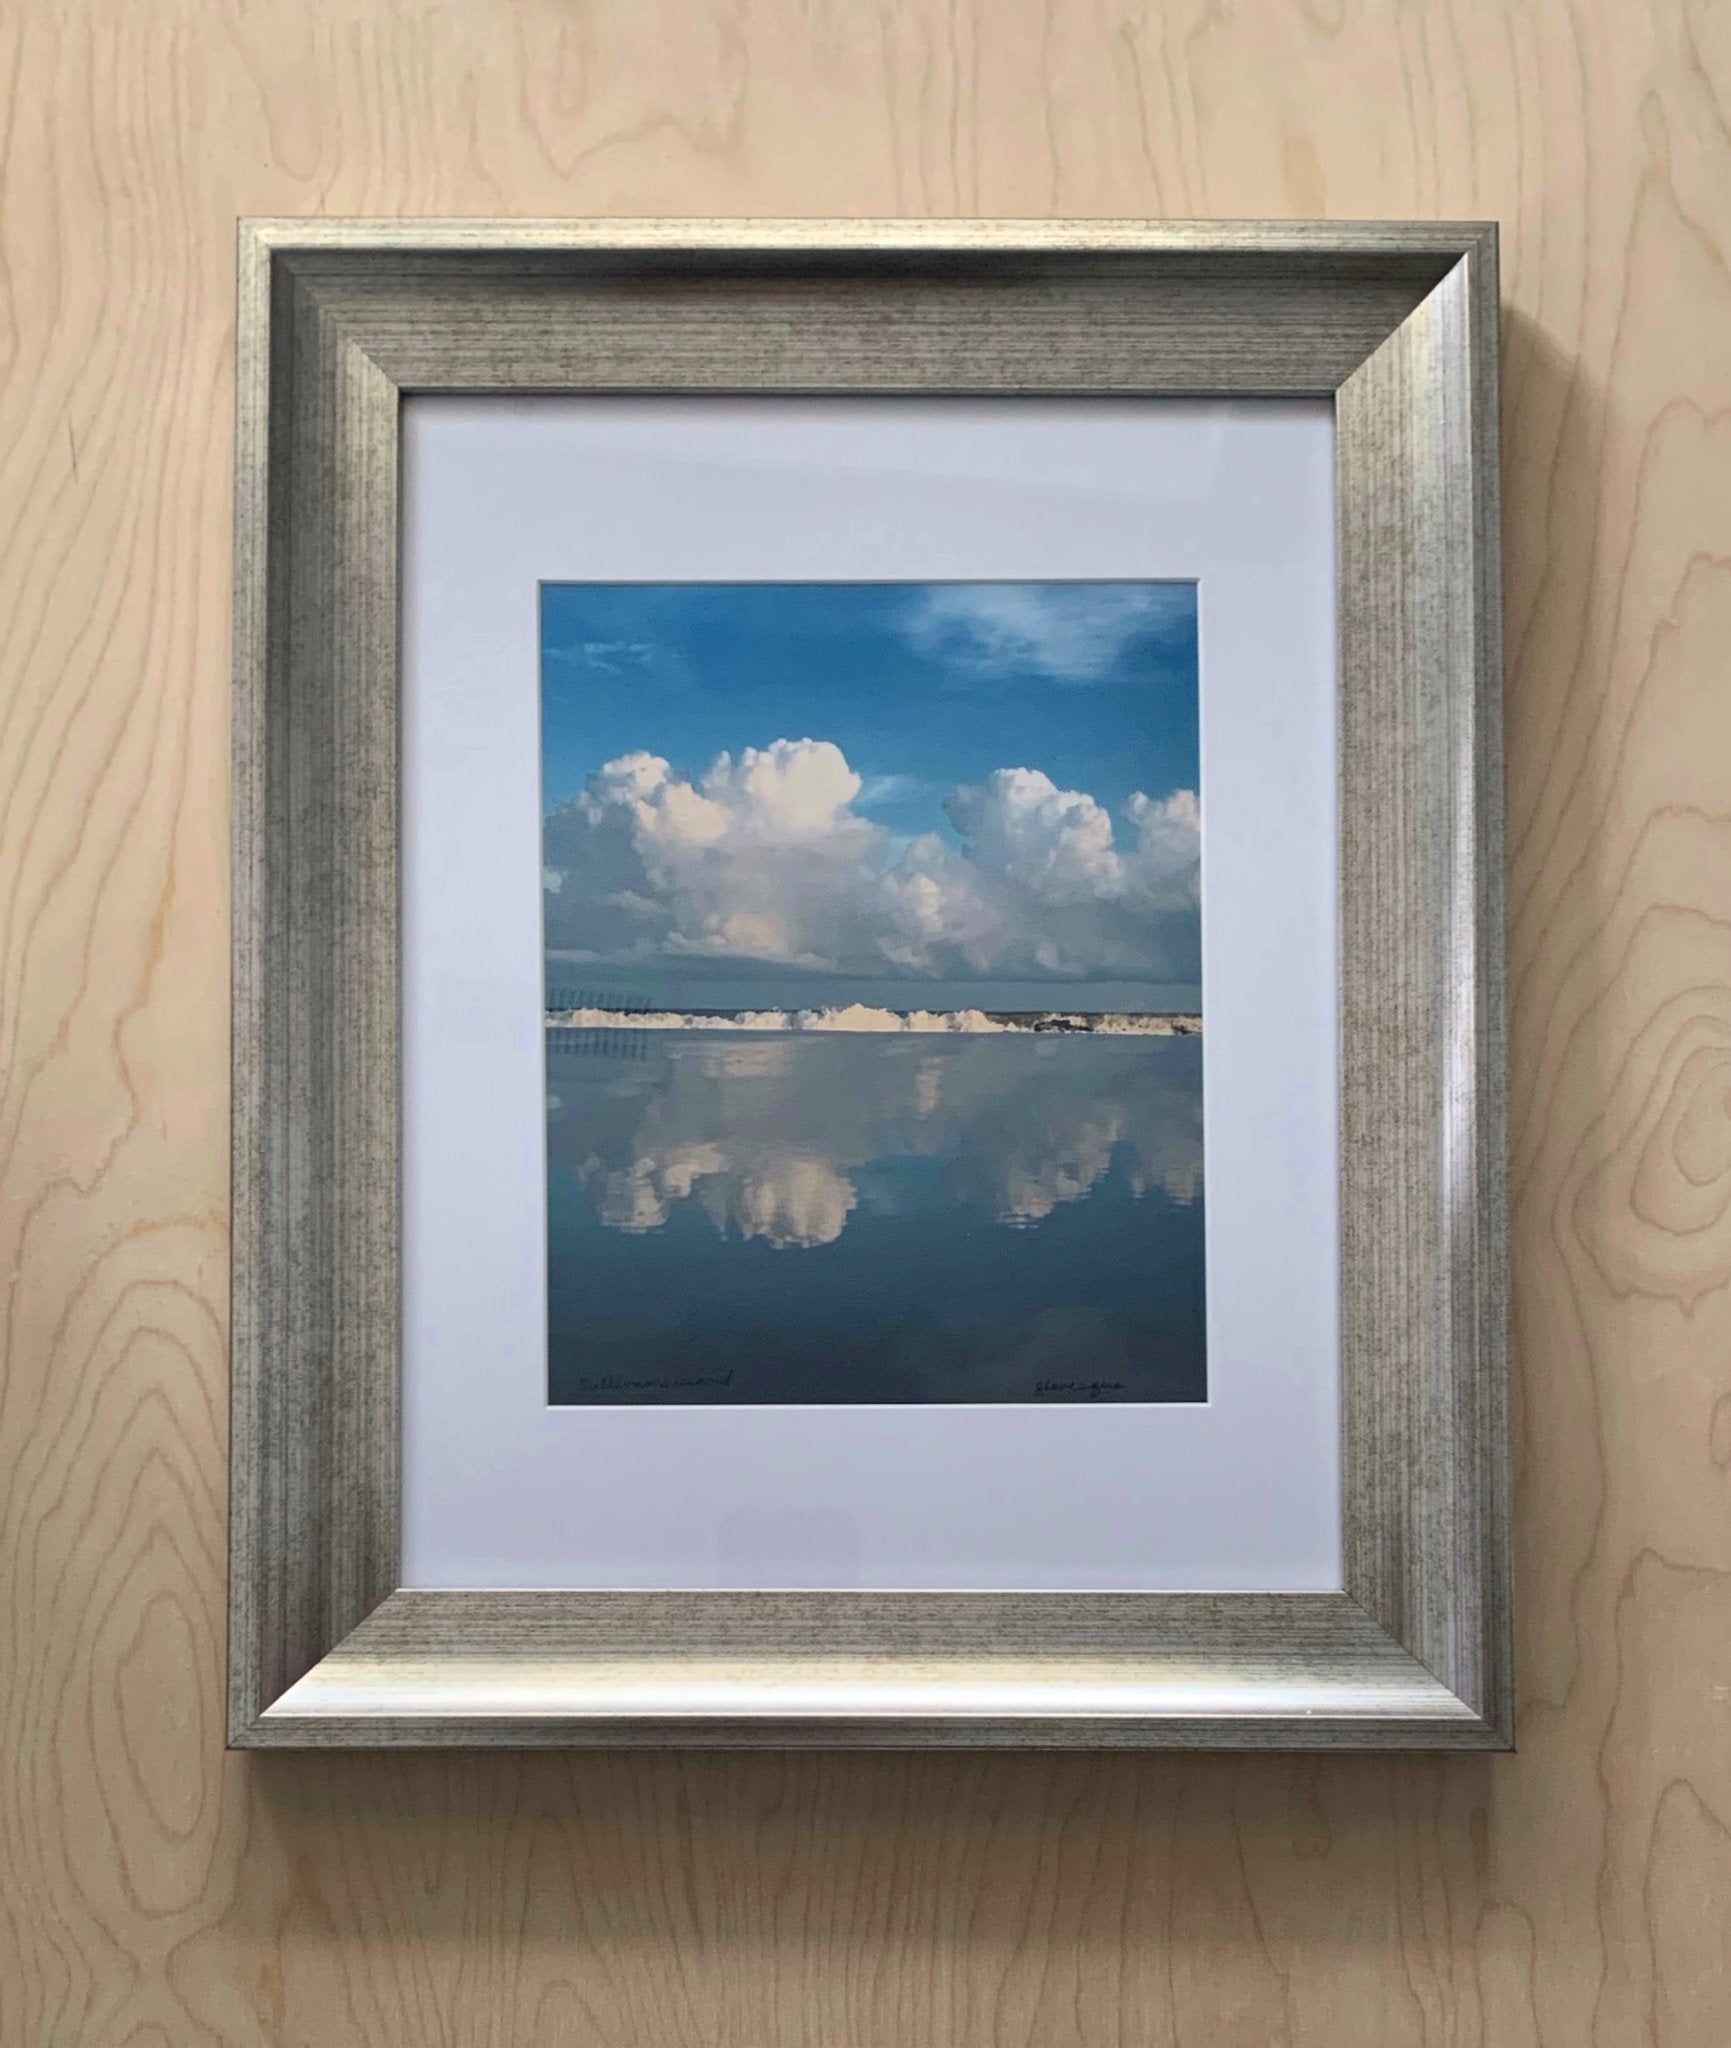 Jackie Levesque Photography: "Clouds Mirror" - Essentially Charleston